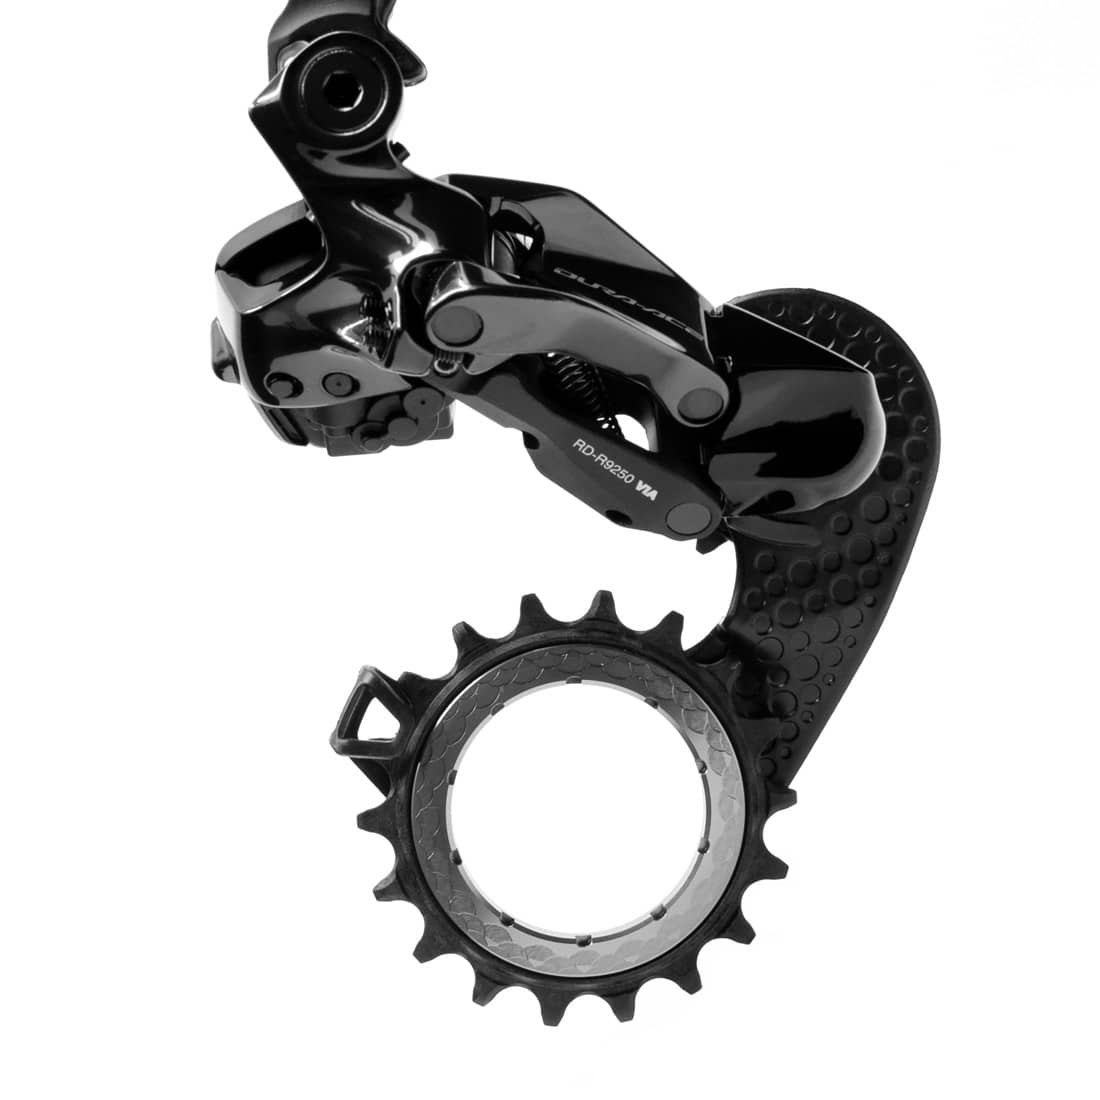 Hollowcage carbon ceramic OSPW cage for Shimano 9200